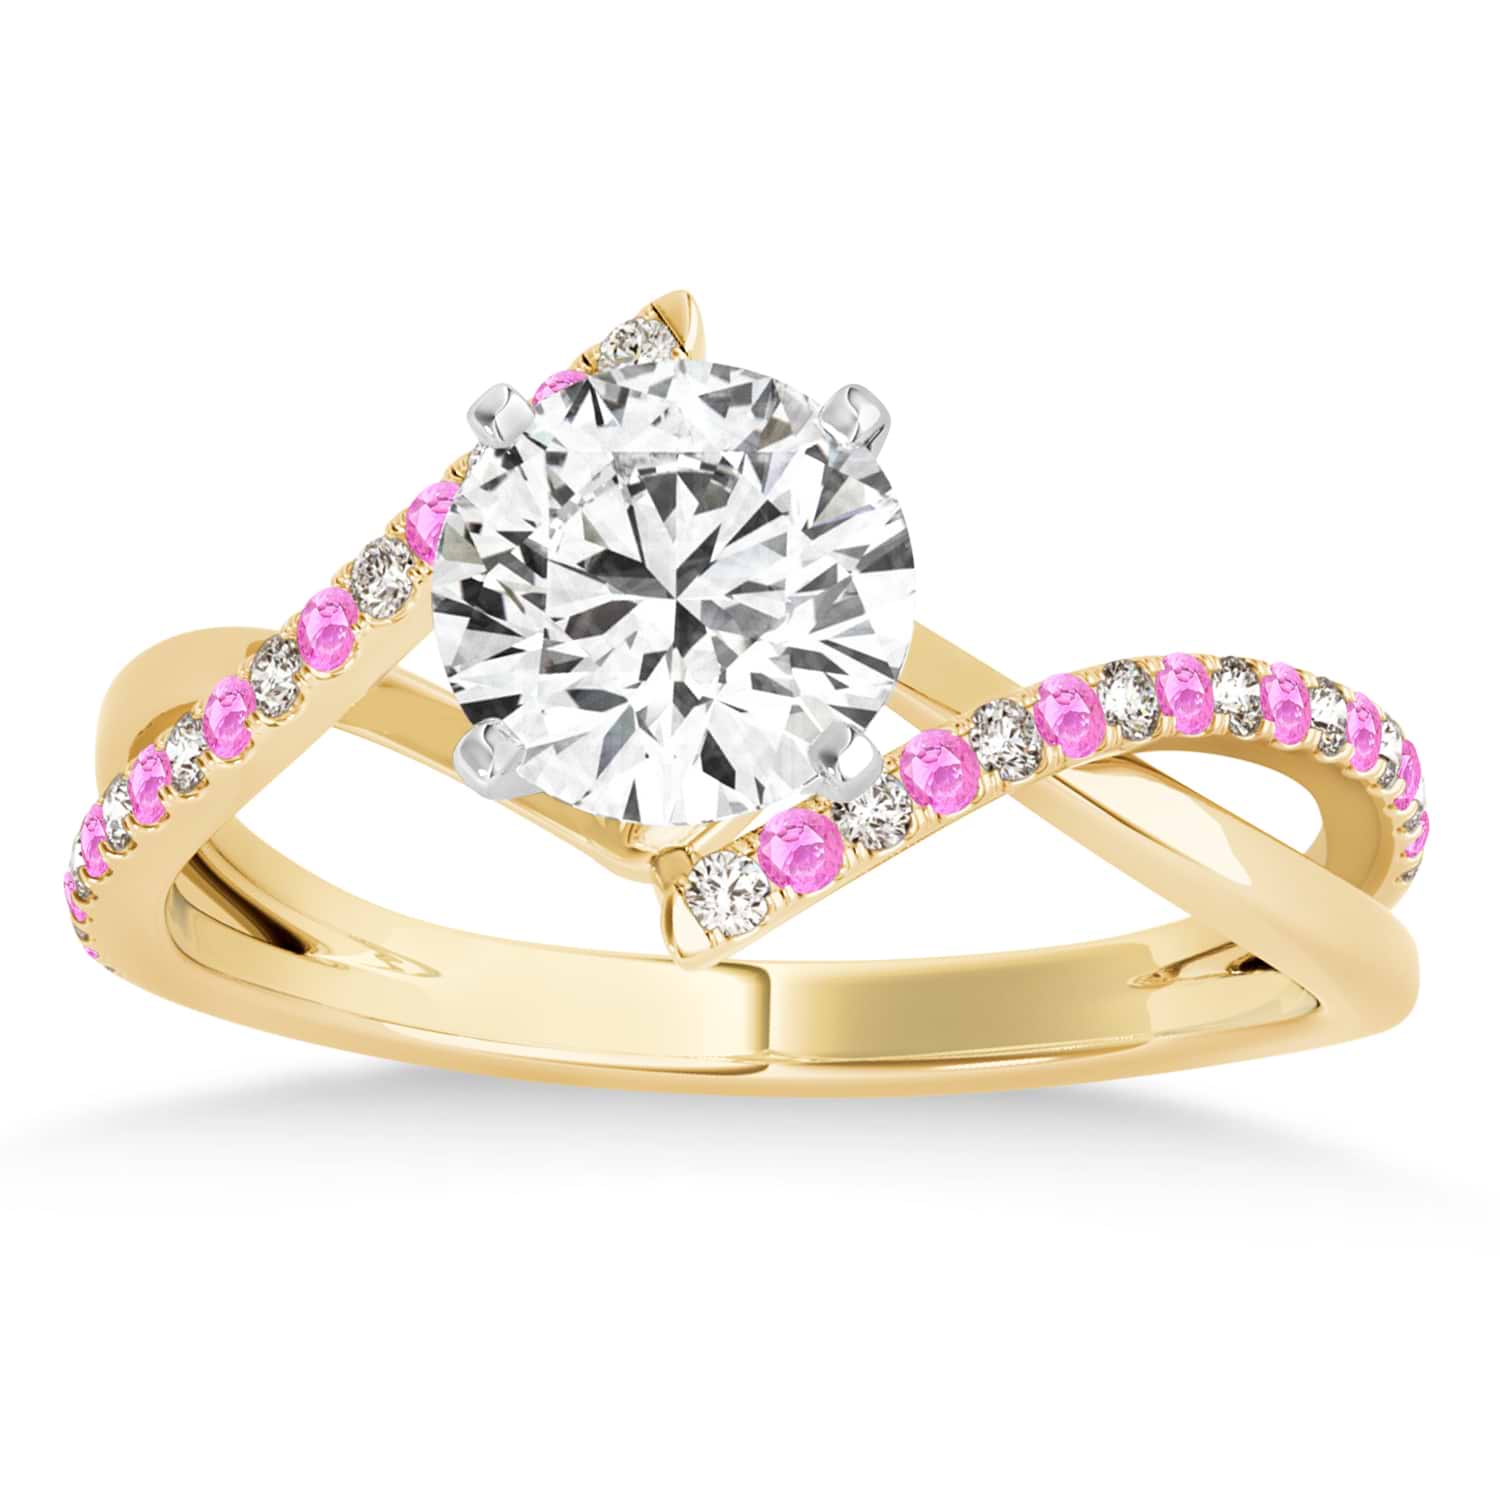 Diamond & Pink Sapphire Bypass Semi-Mount Ring in 18k Yellow Gold (0.14ct)